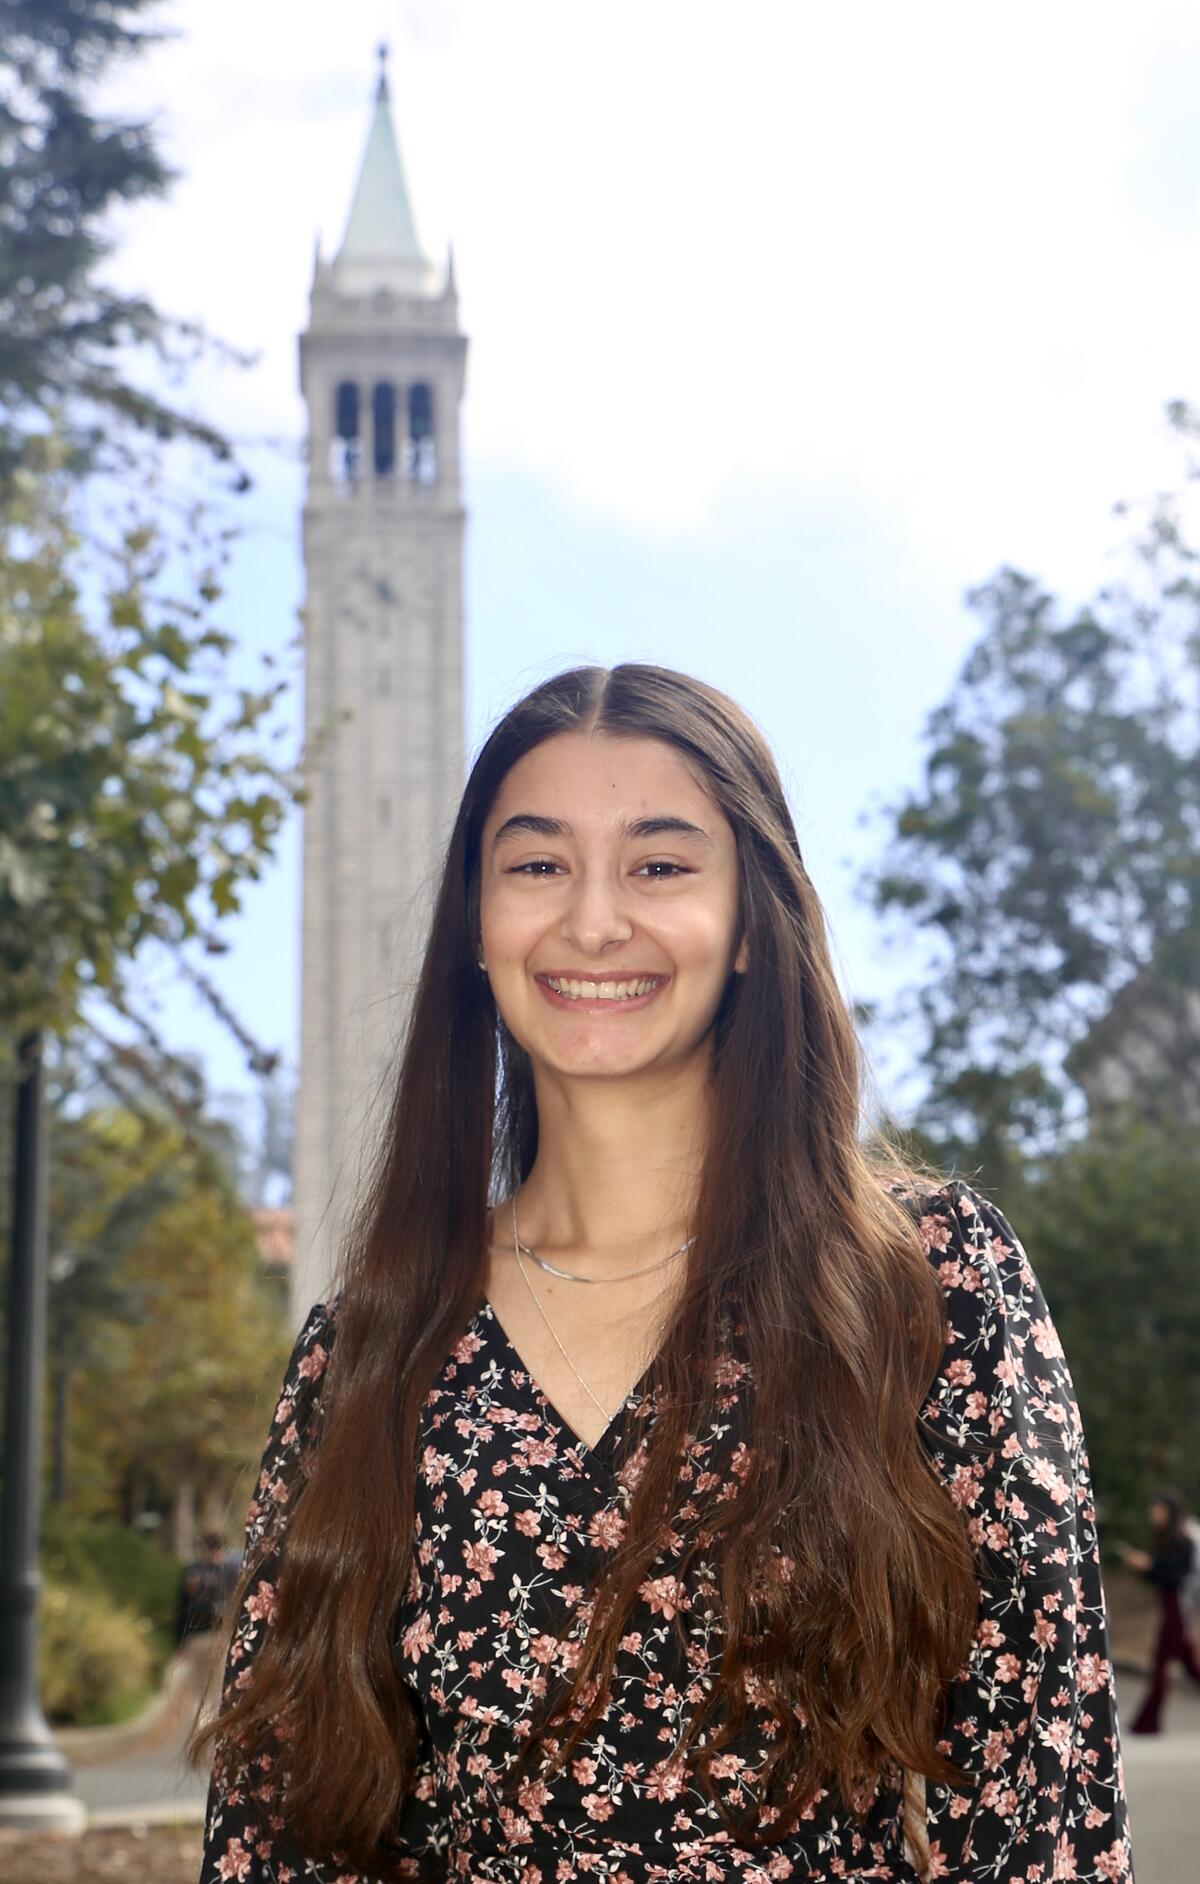 Photo of Fabiola posing in front of the campanile on Berkeley's campus